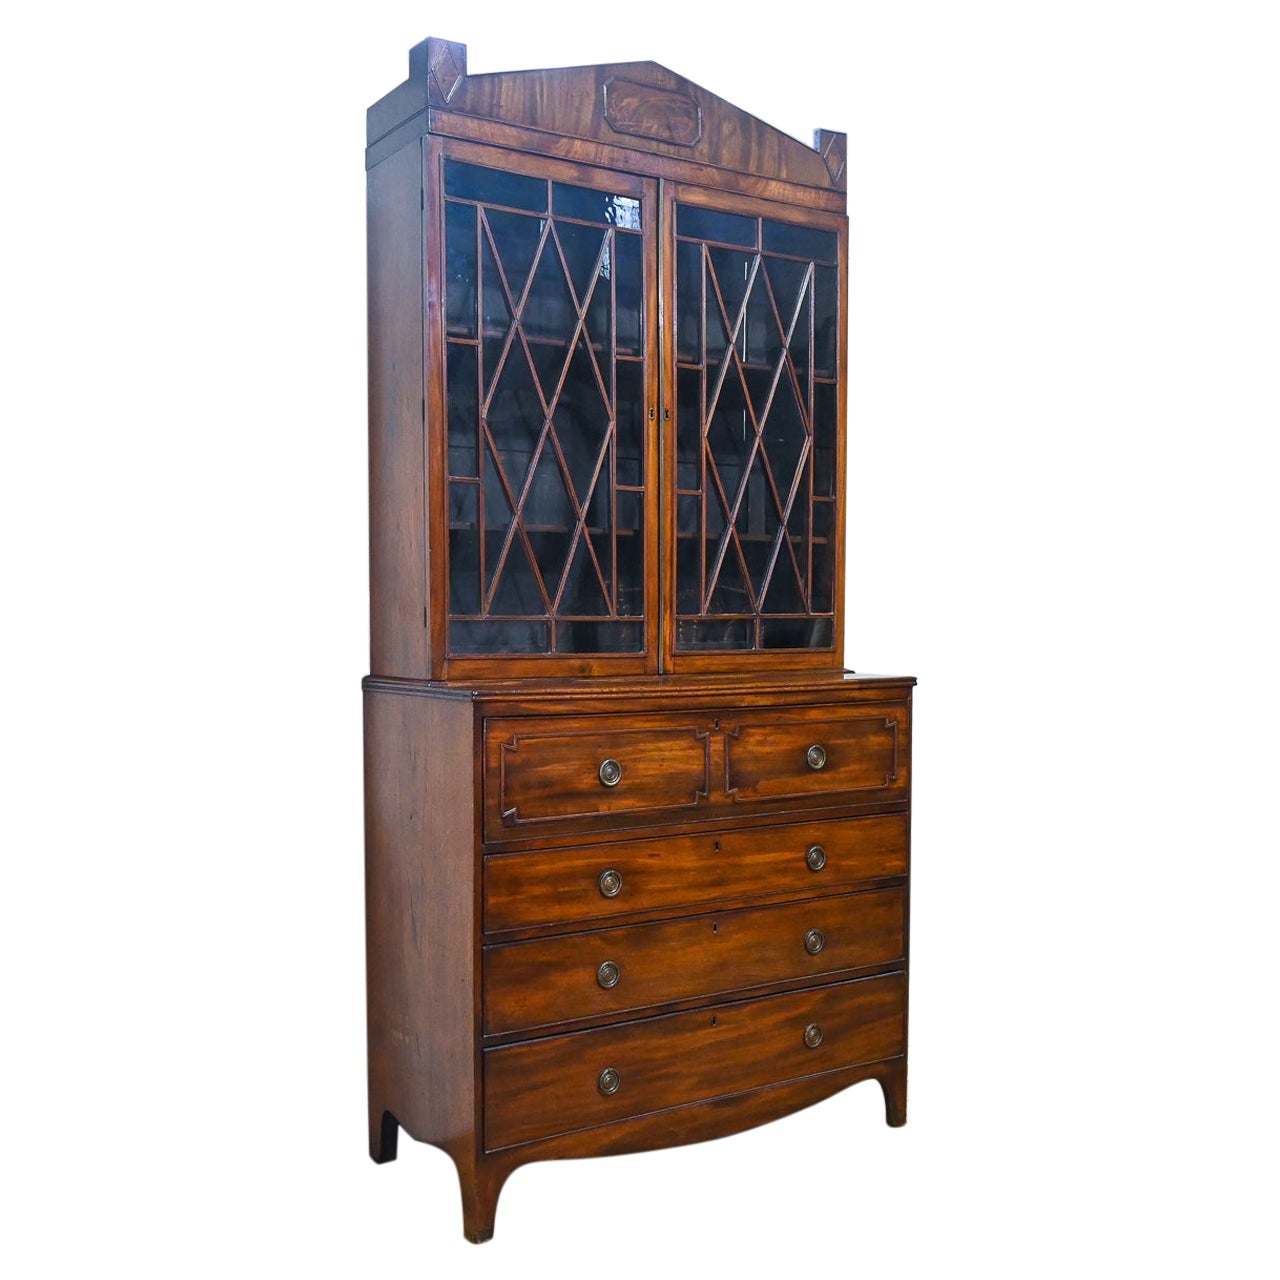 A Regency Mahogany Astral Glazed Secretaire - Bookcase For Sale